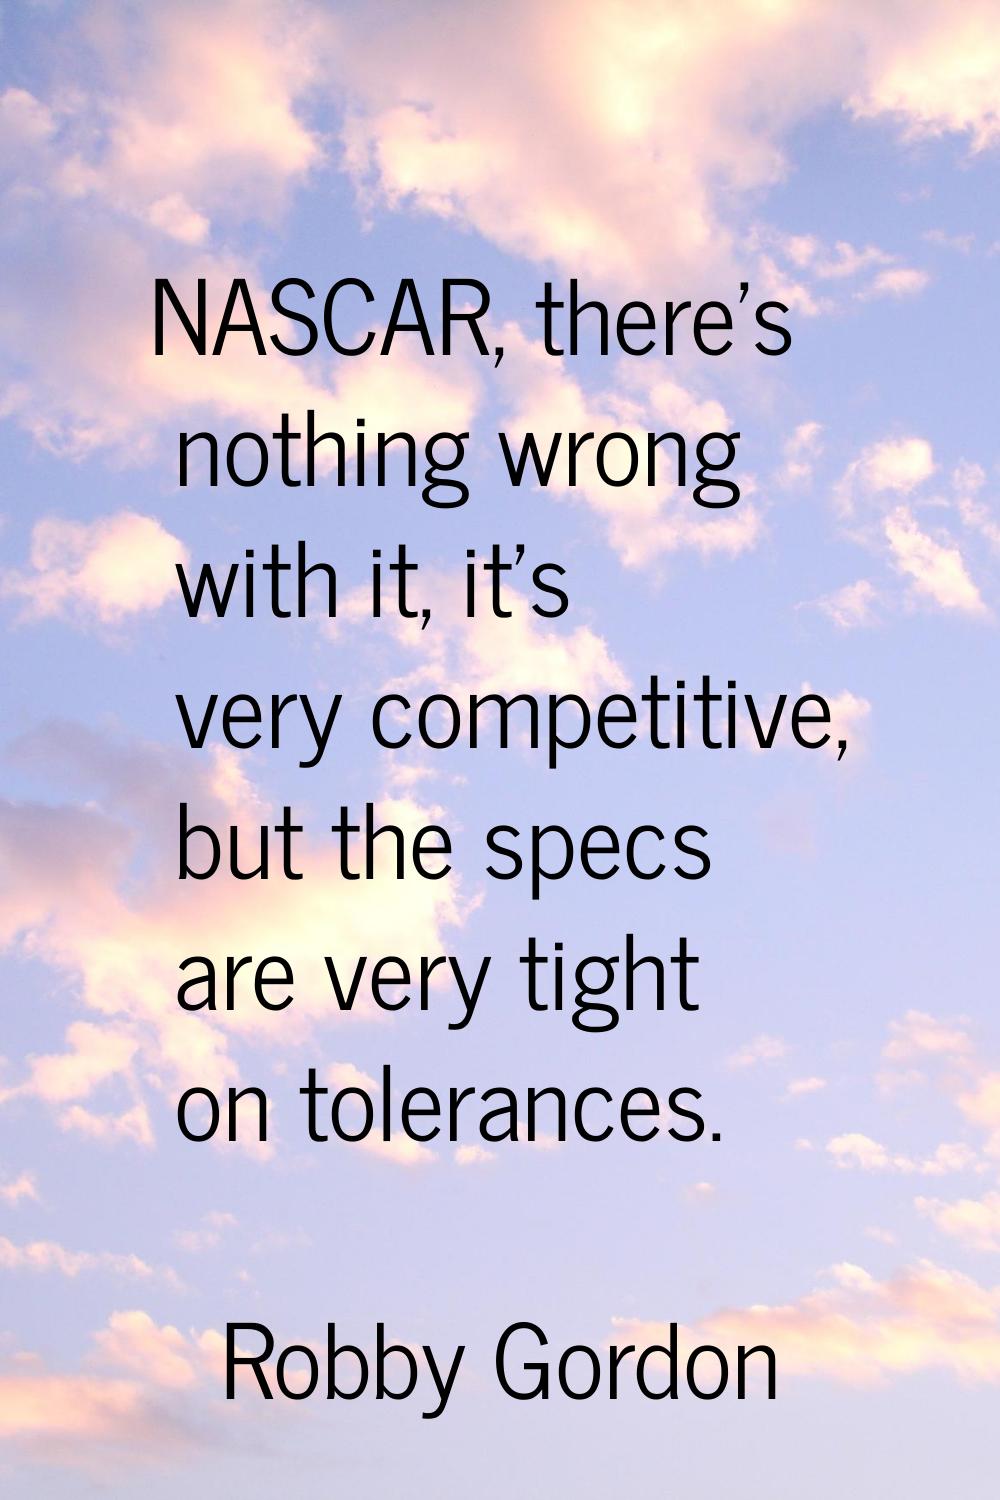 NASCAR, there's nothing wrong with it, it's very competitive, but the specs are very tight on toler